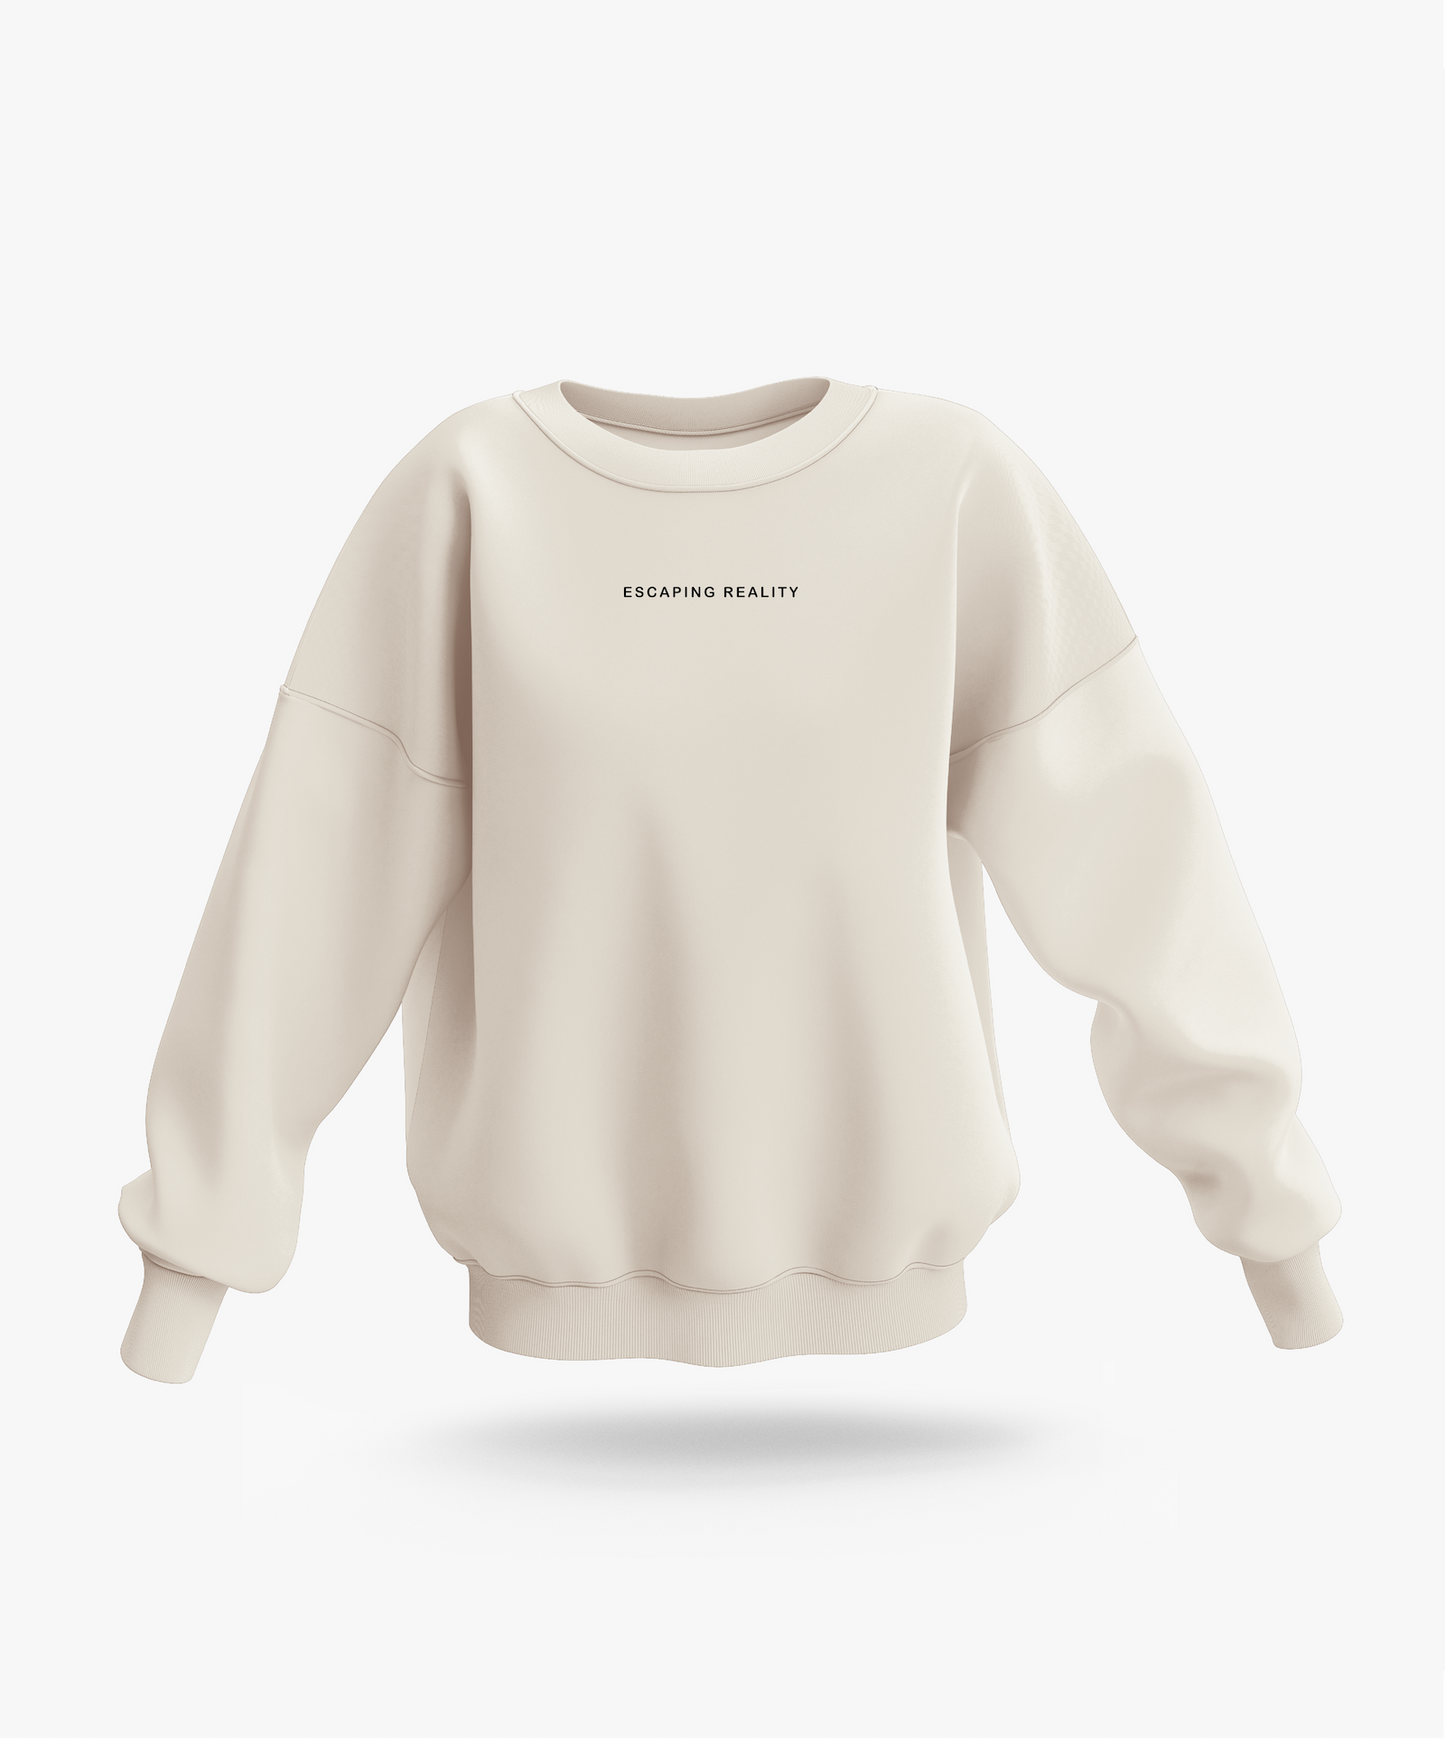 Escaping Reality Crewneck Sweater